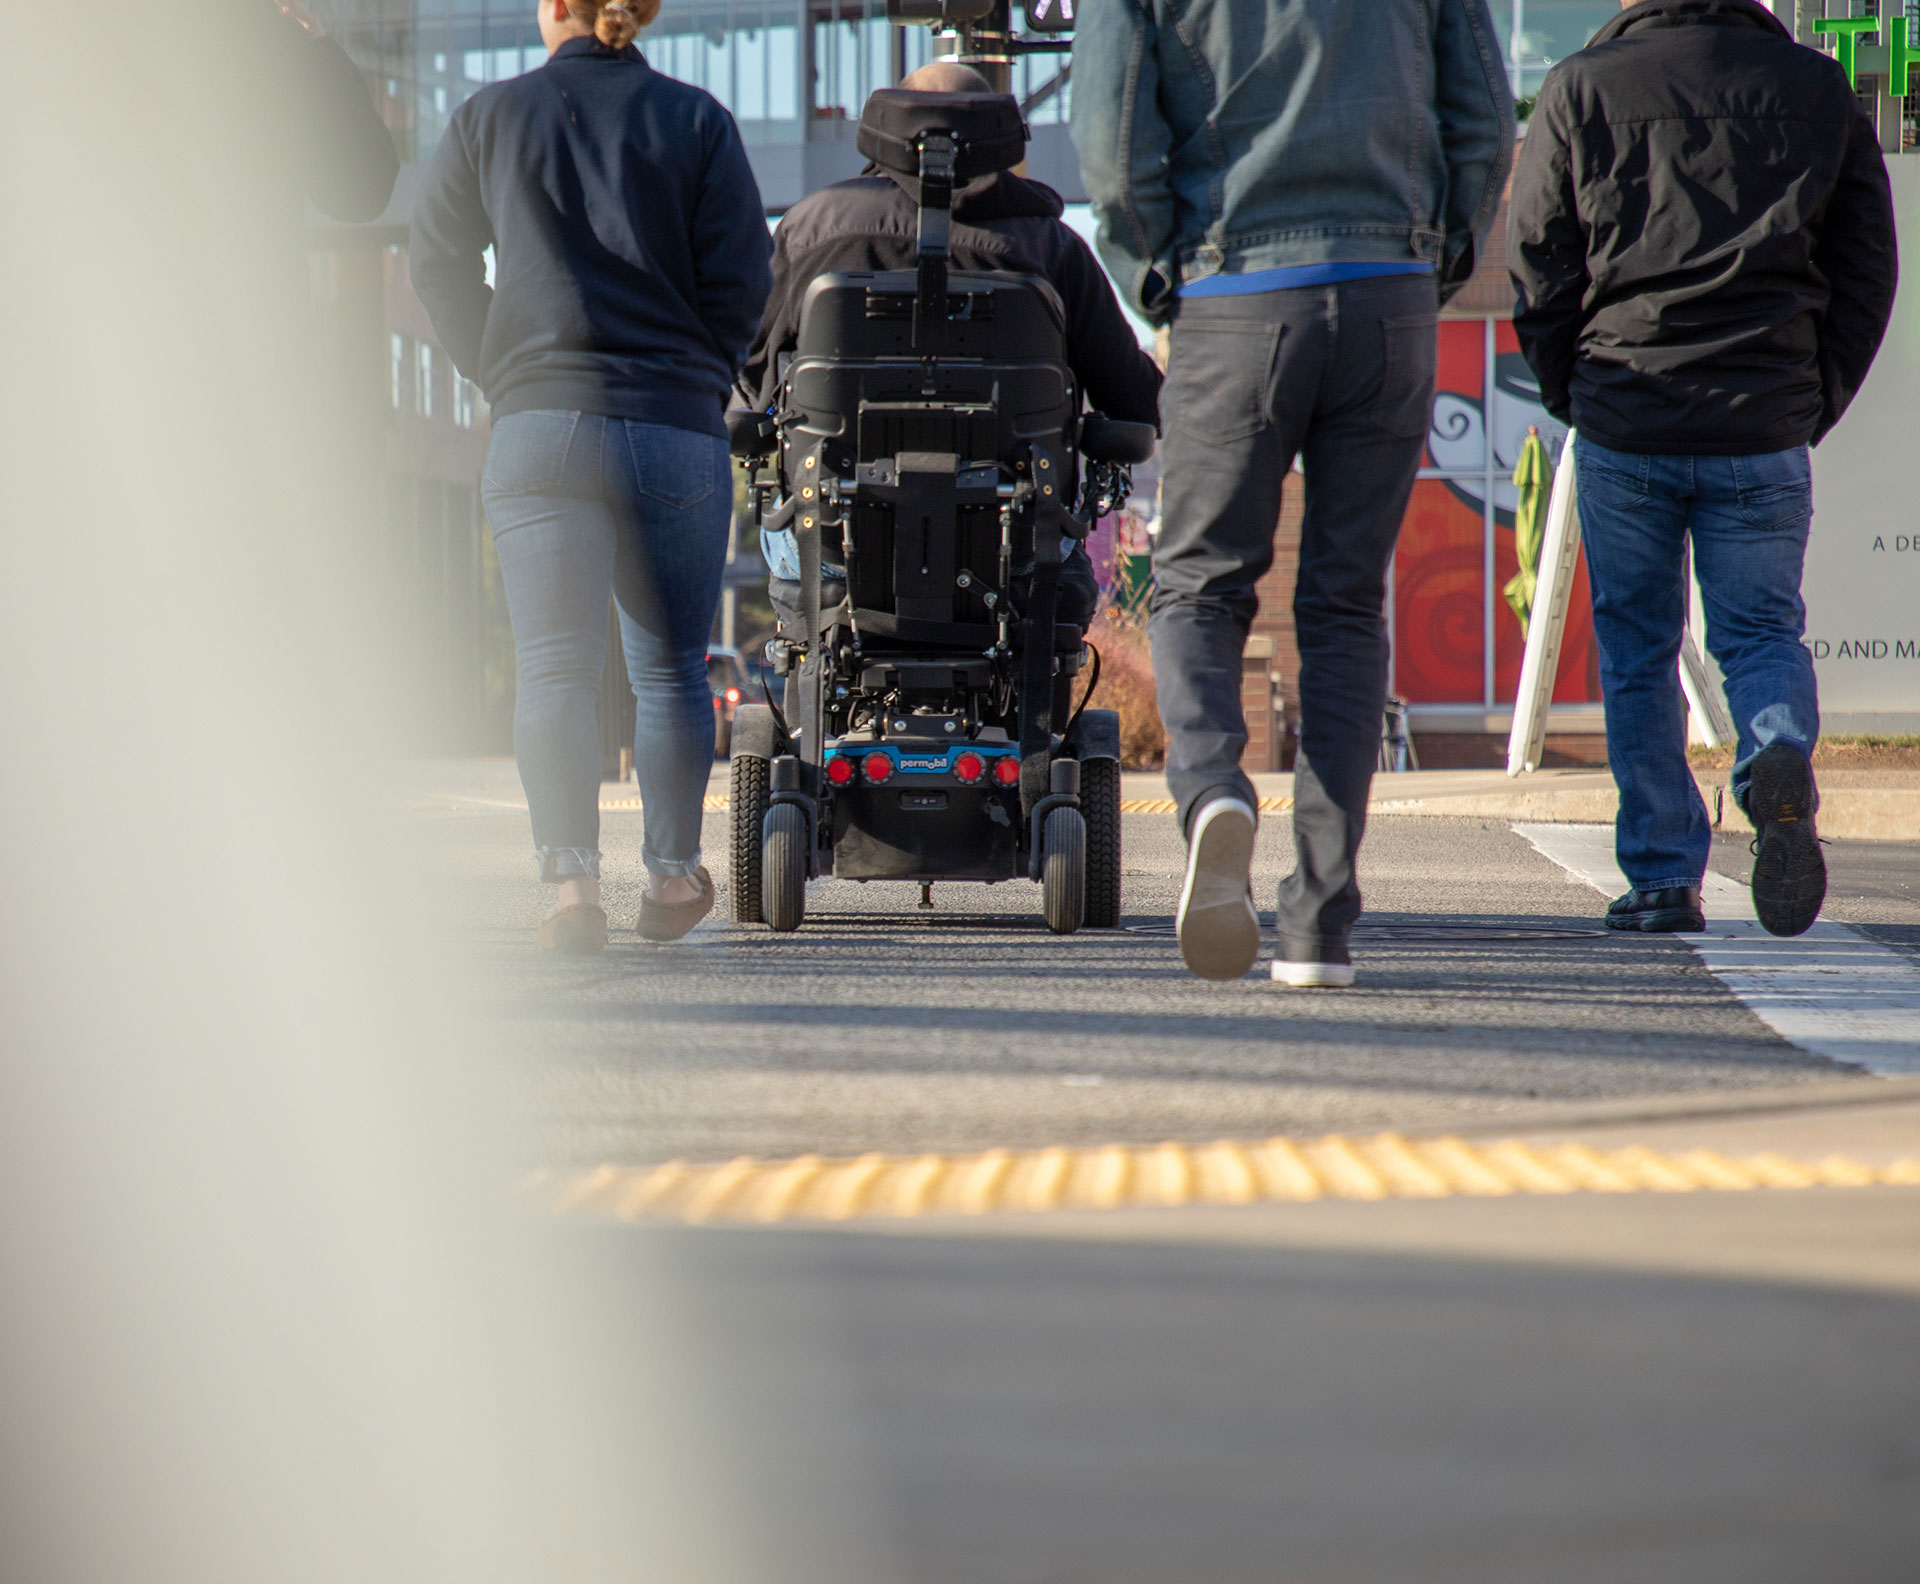 a group of pedestrians crossing the street together, one man uses a power wheelchair